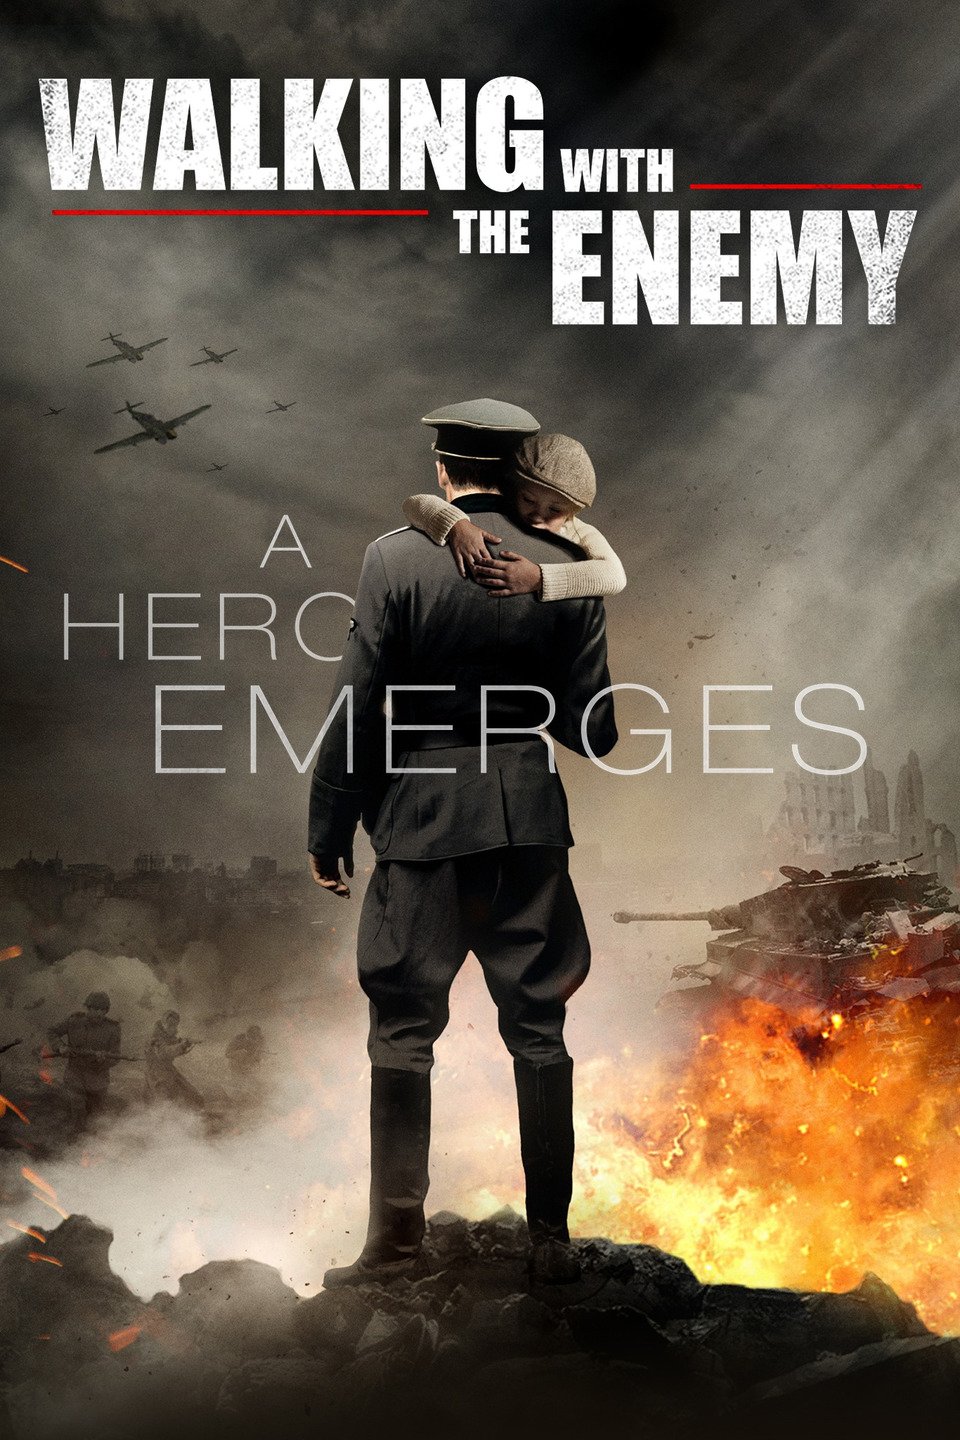 walking with the enemy movie review